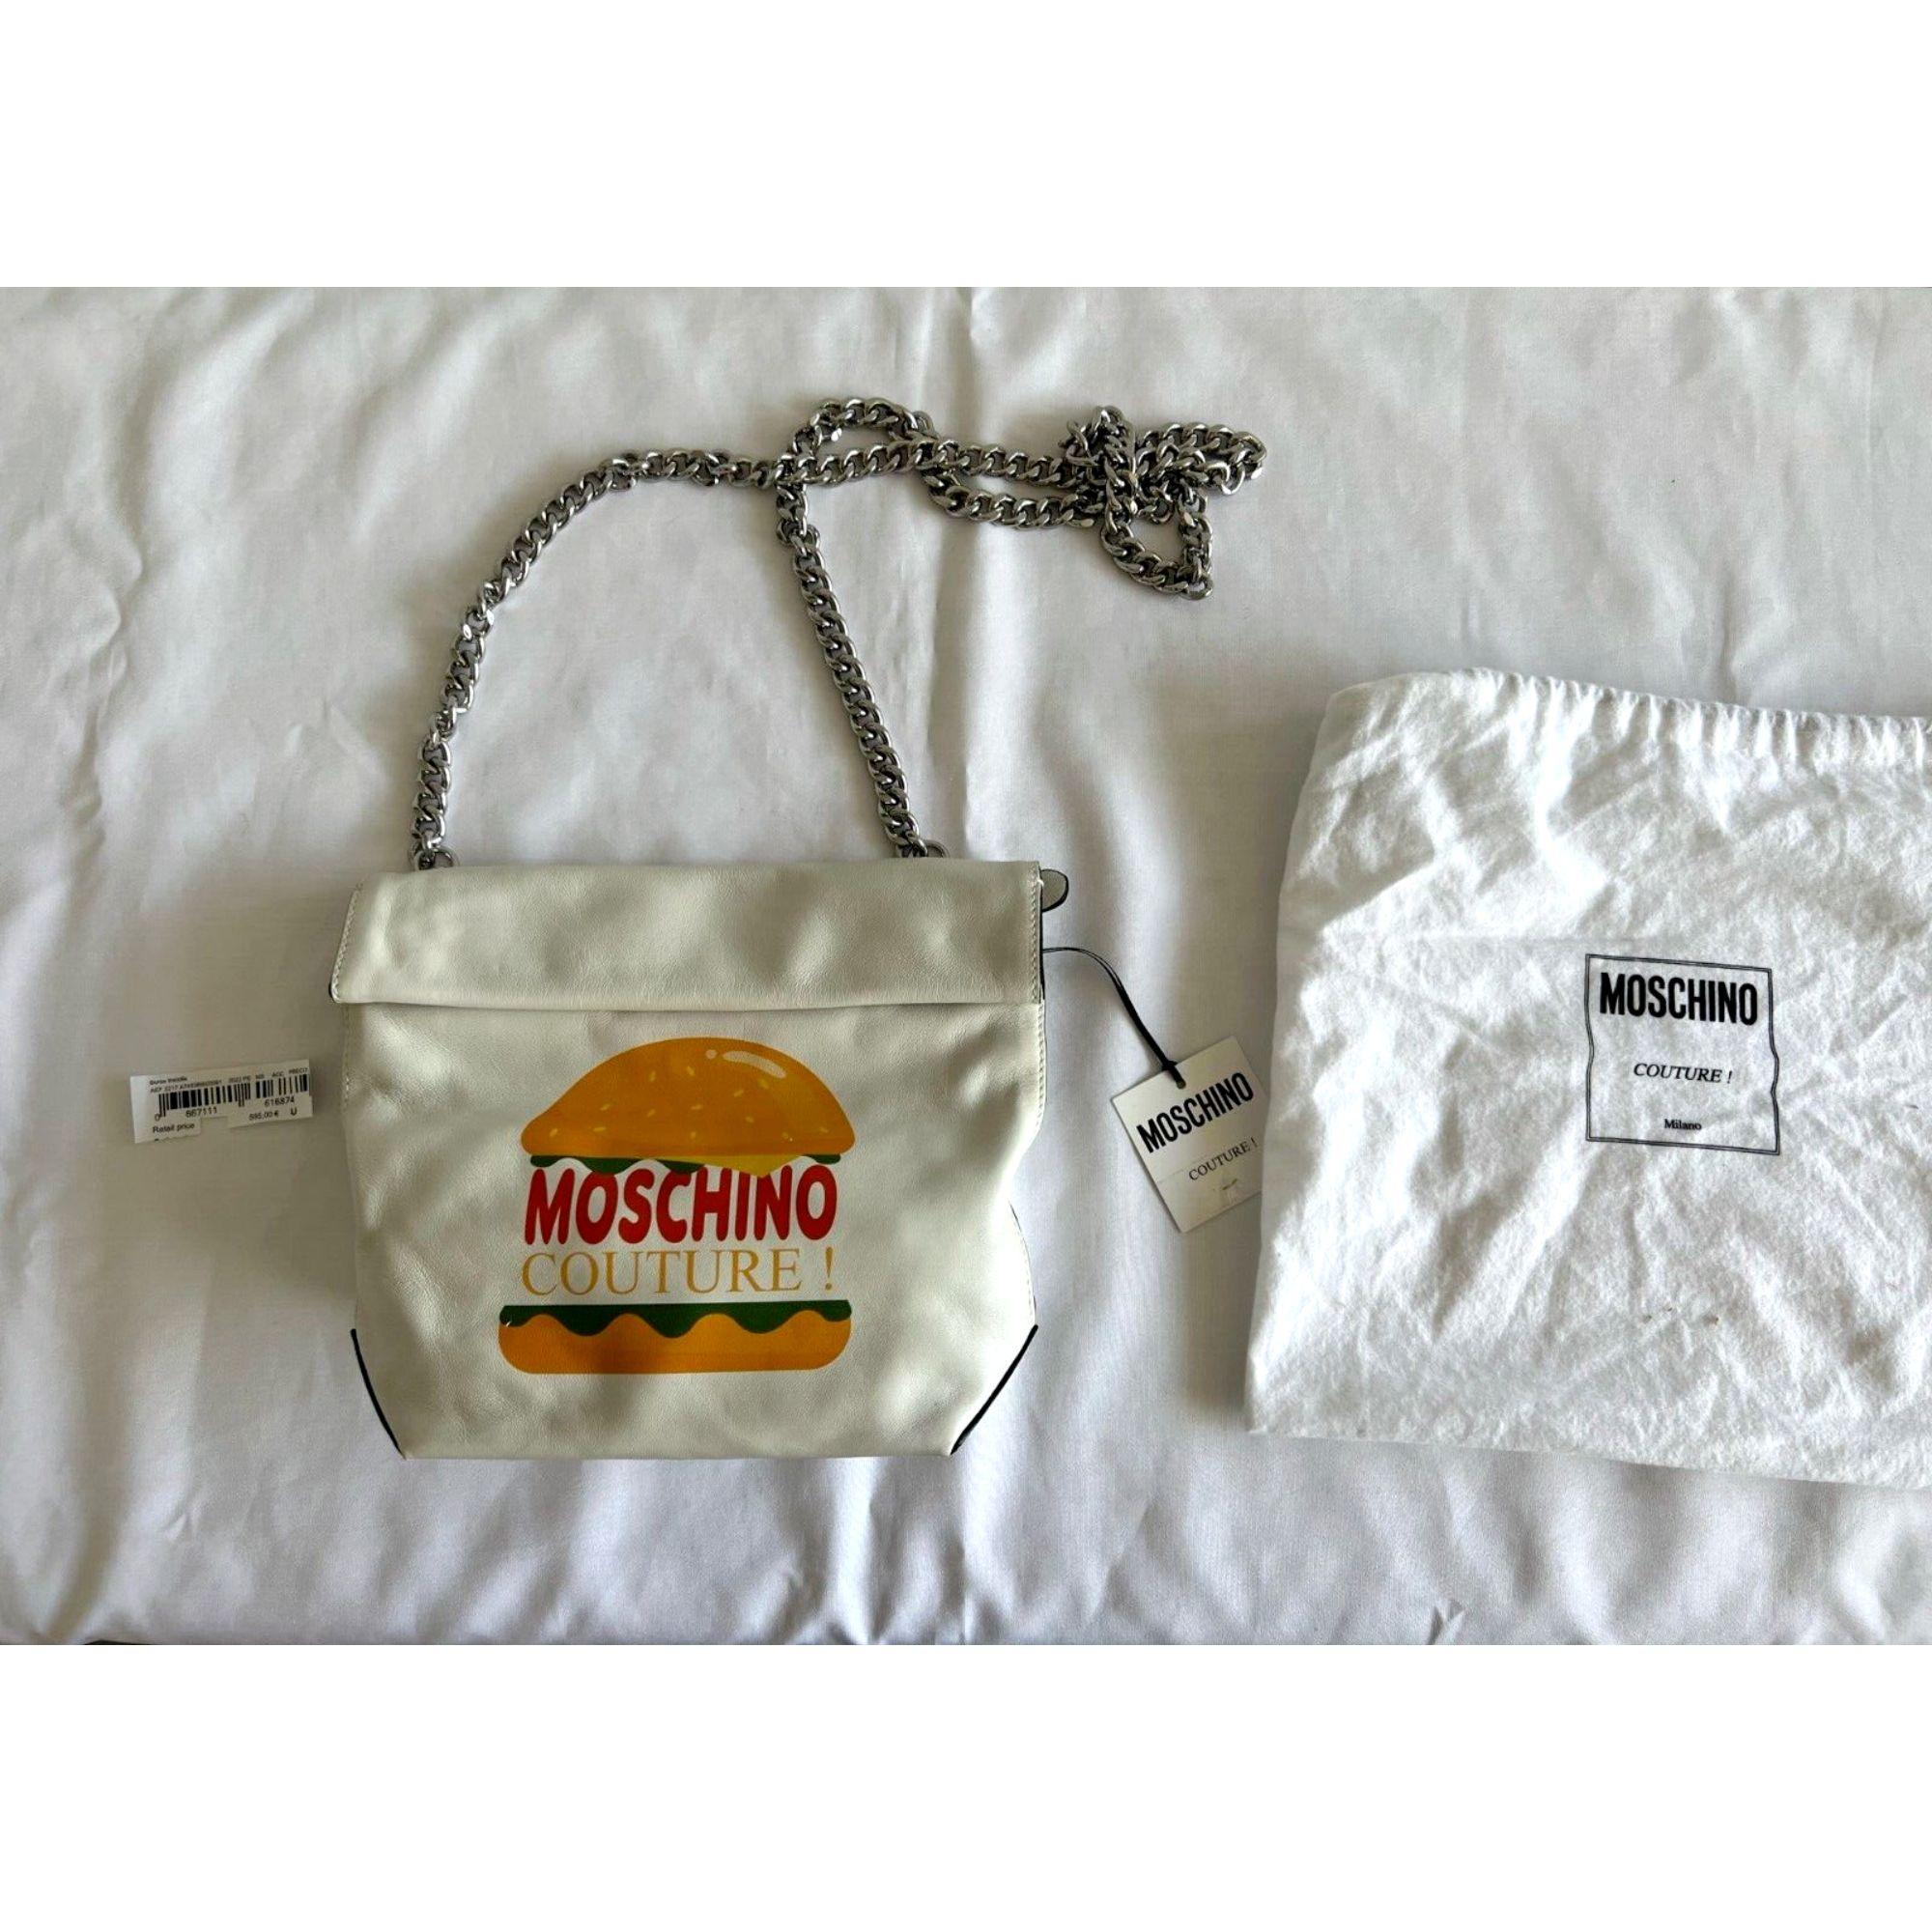 SS22 Moschino Couture The Diner White Leather Lunch Bag Hamburger For Sale 11